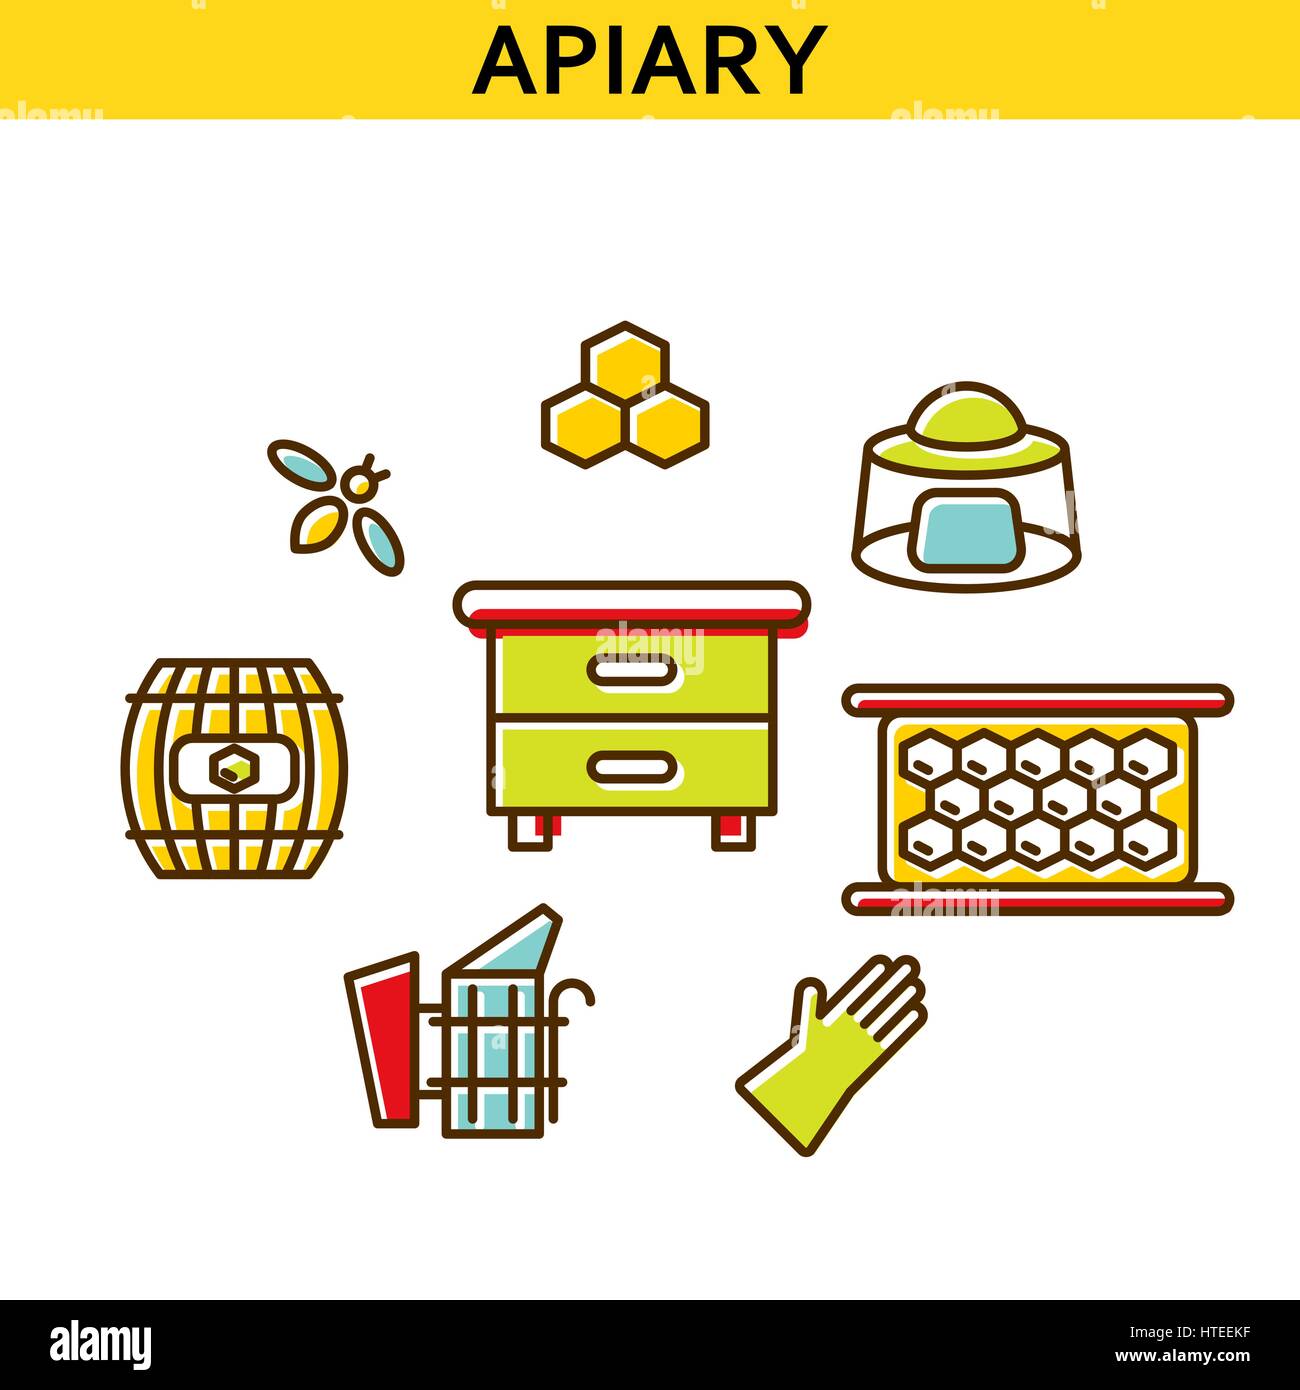 Apiary line icons vector. Stock Vector